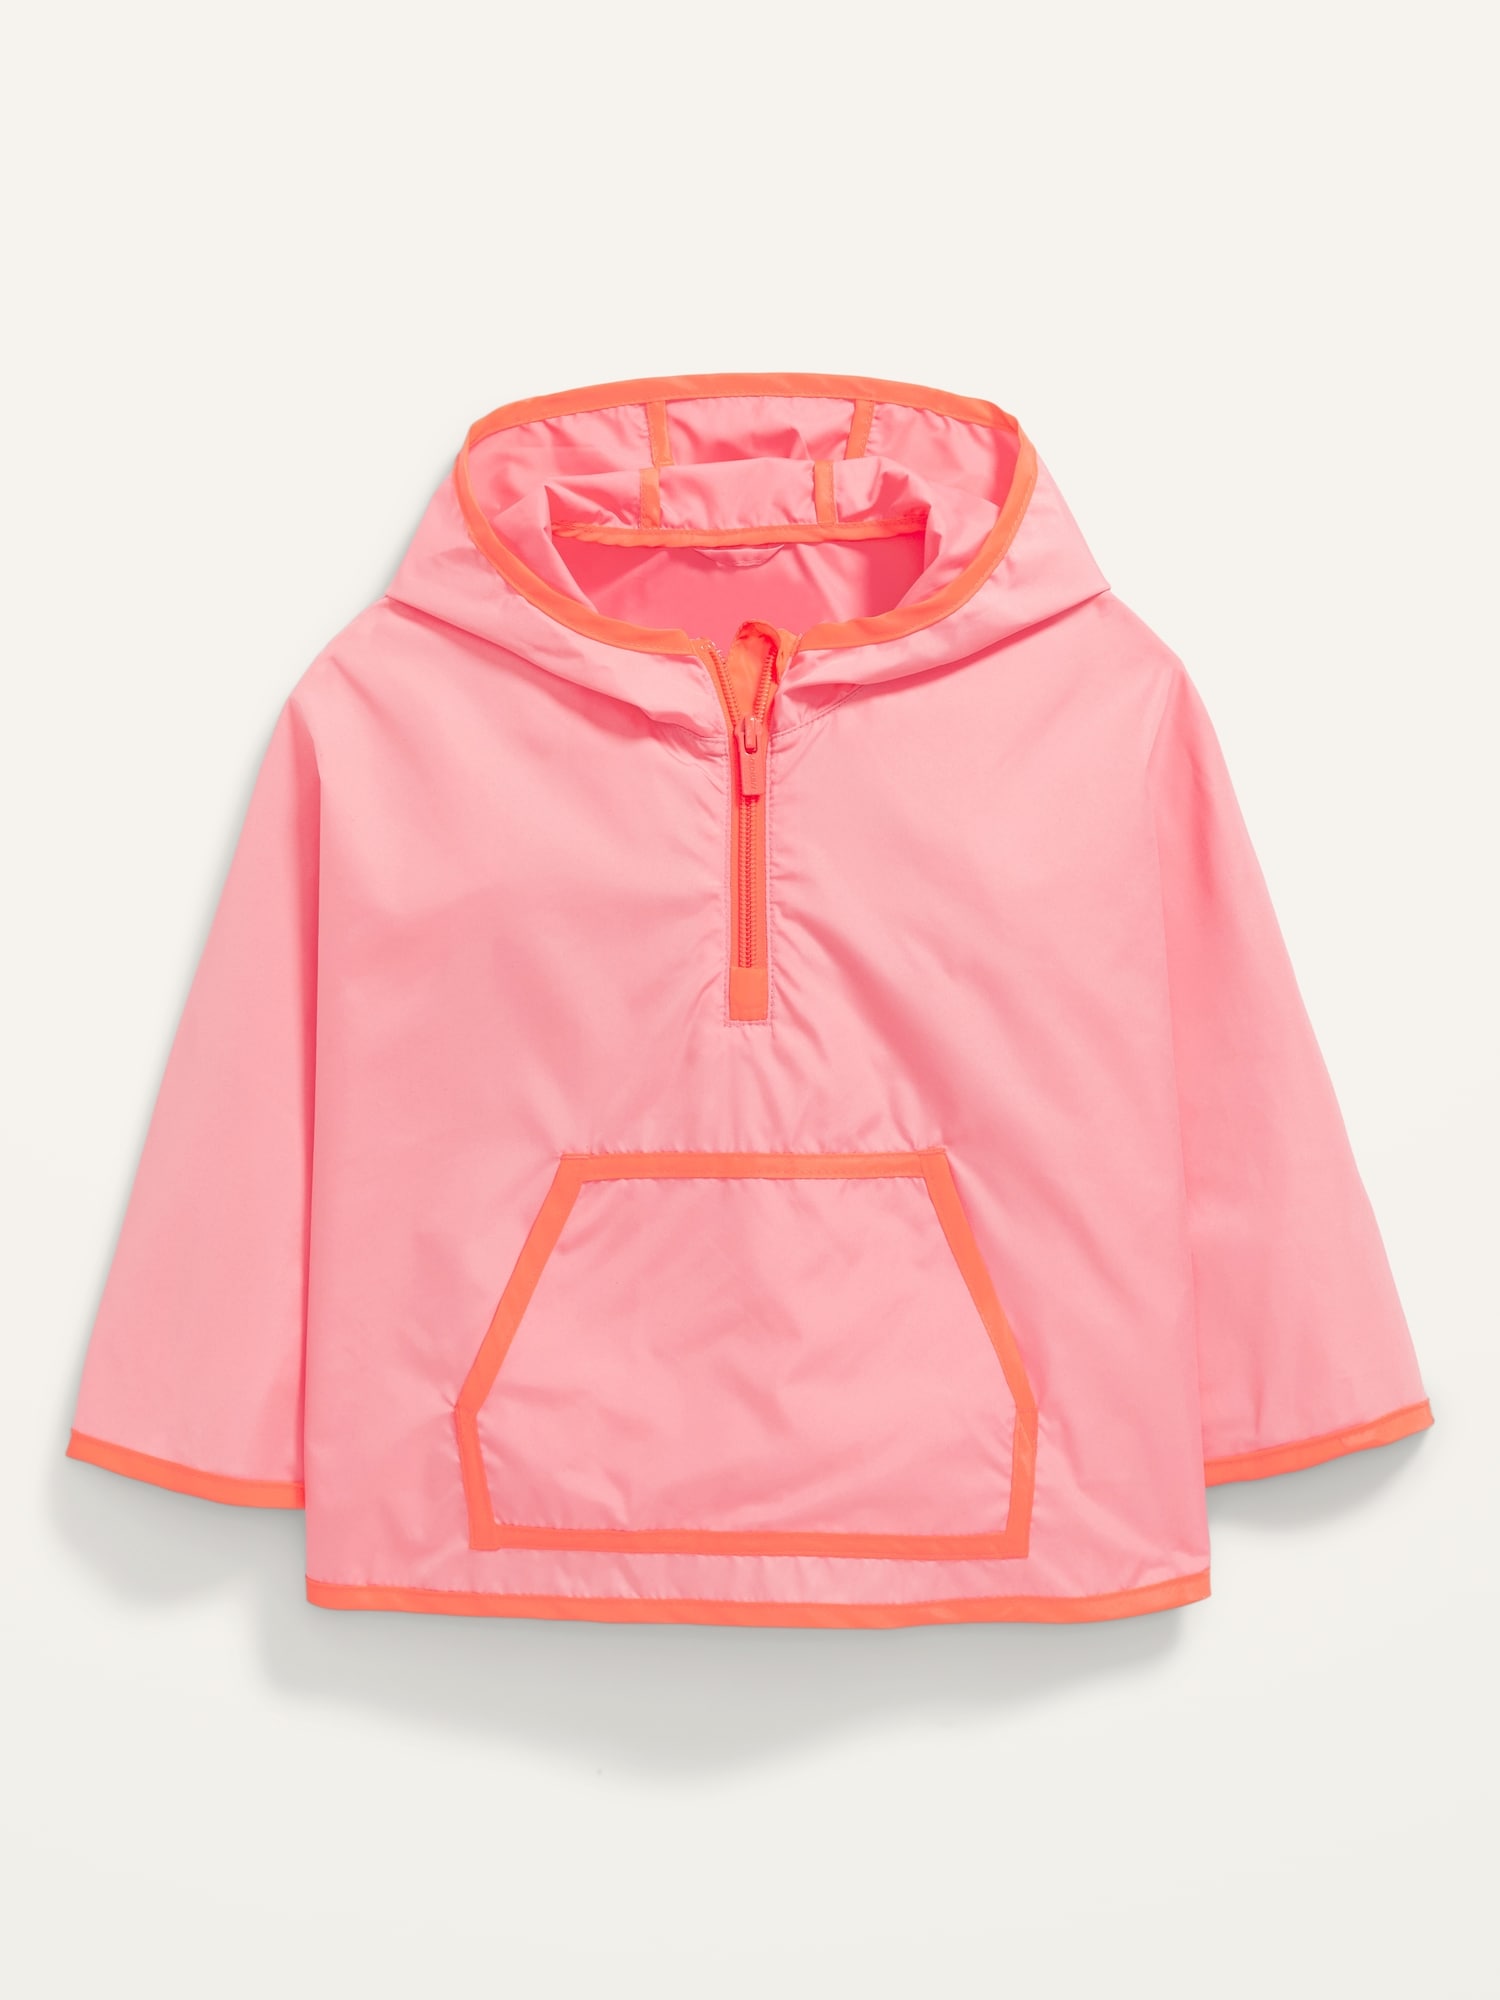 Water-Resistant Poncho Rain Jacket for Toddler Girls